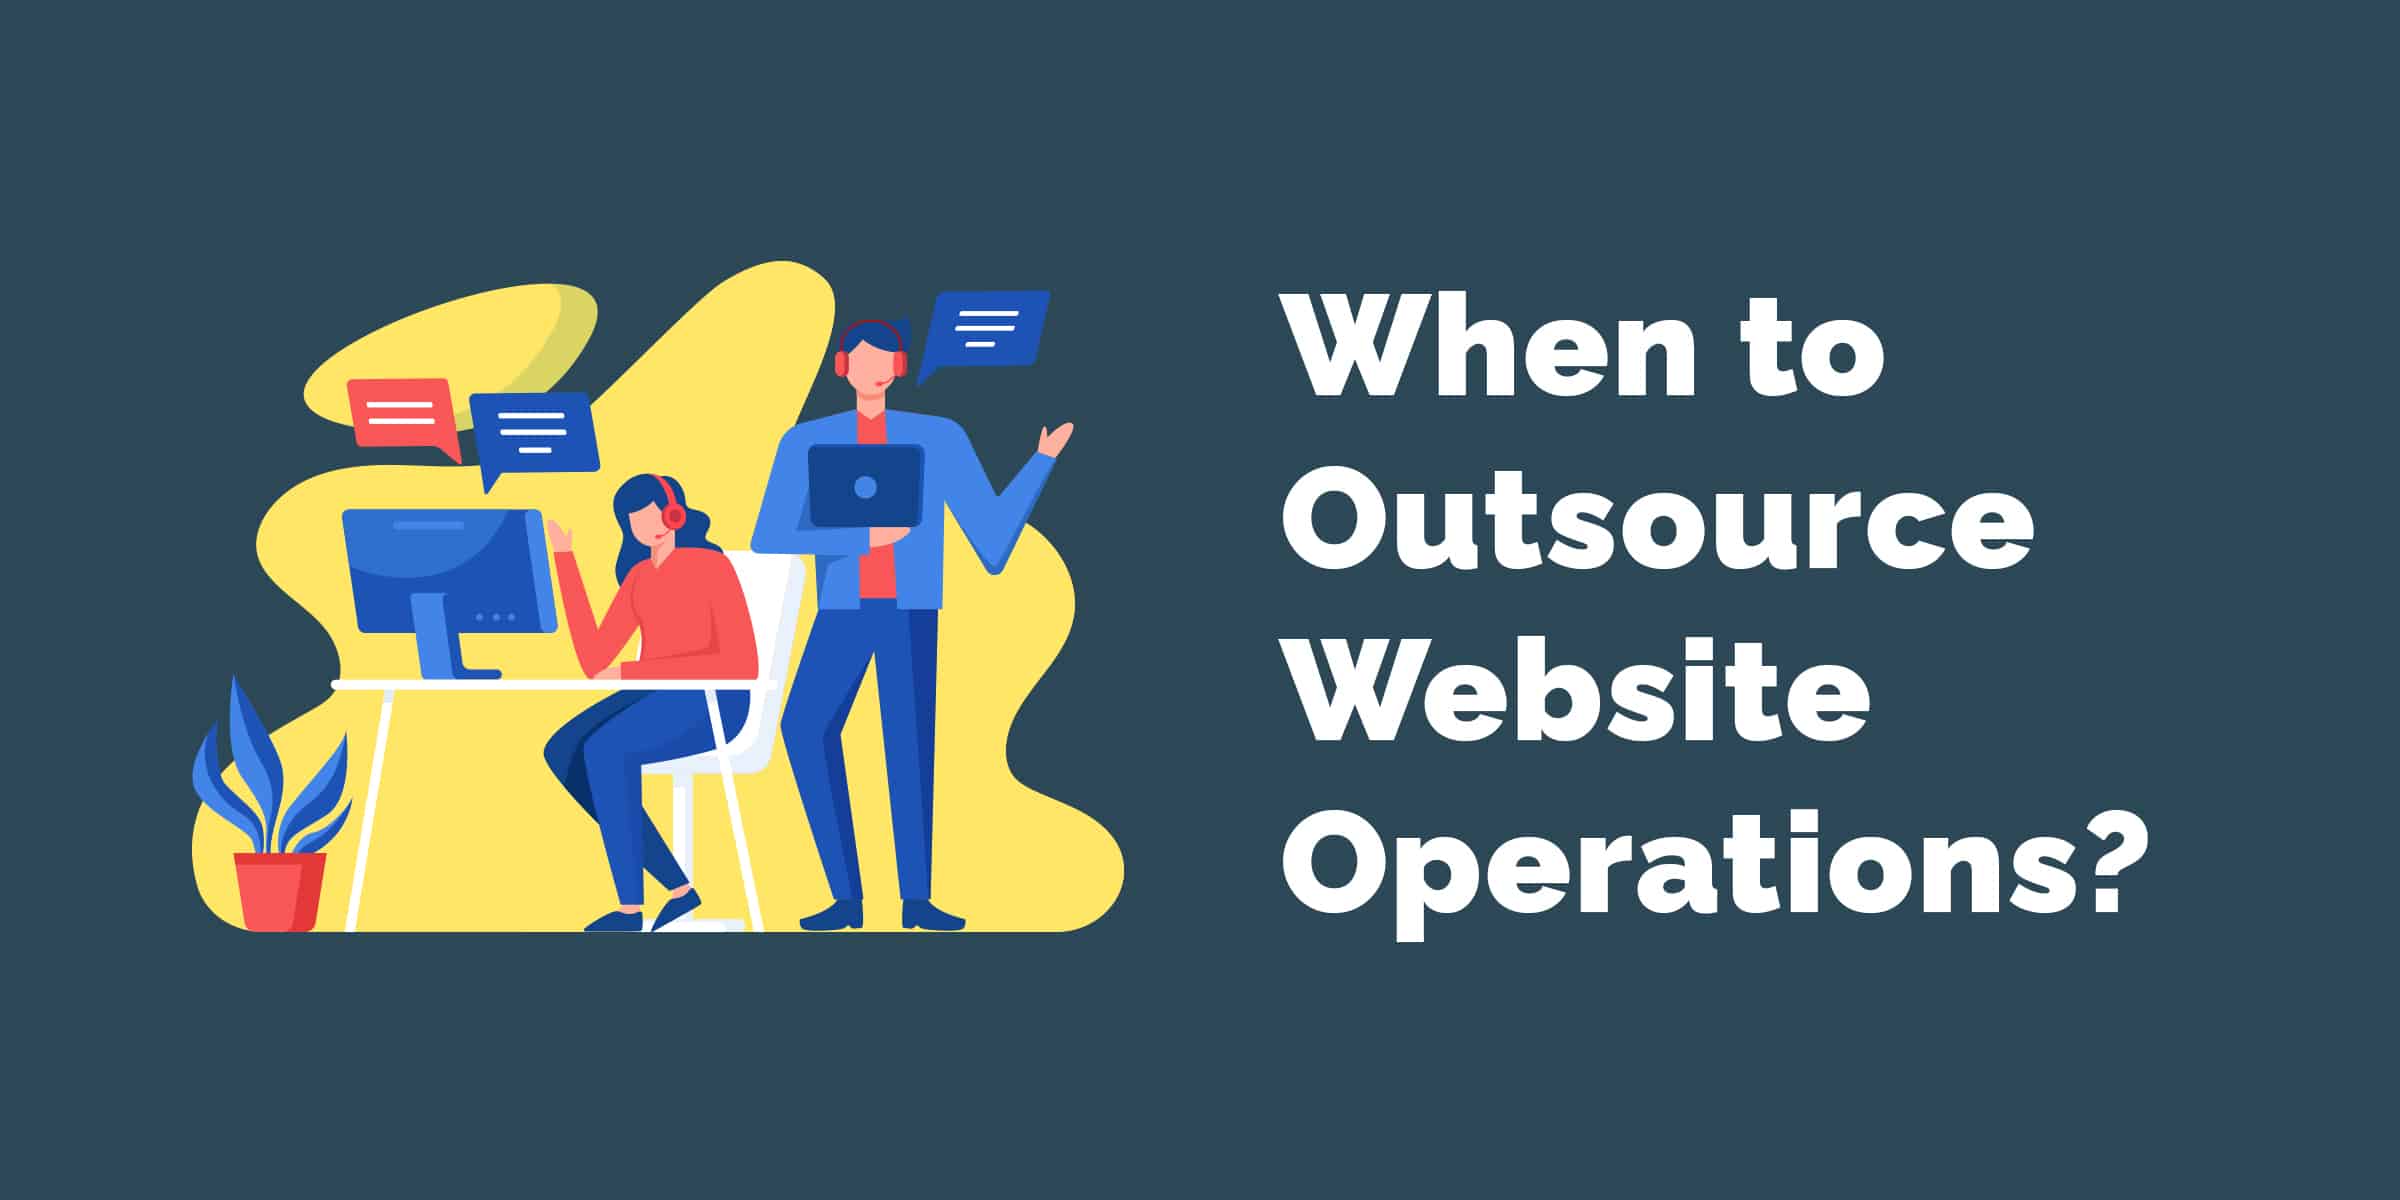 When to Outsource Website Operations